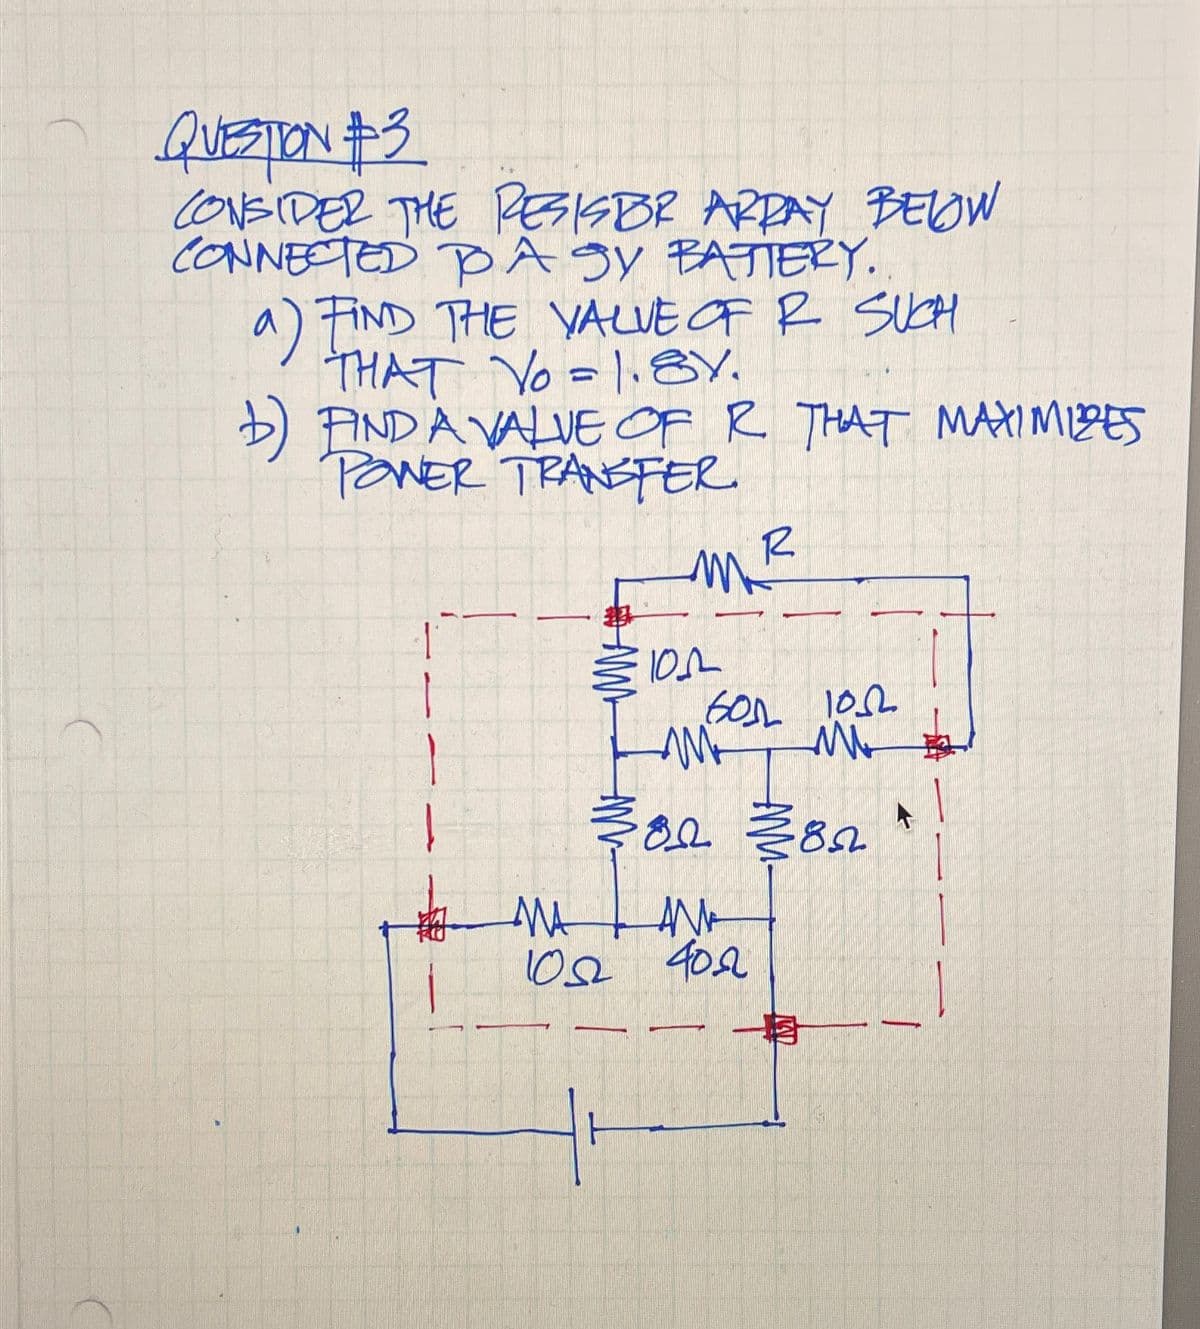 QUESTION #3
CONSIDER THE RESISBR ARRAY BELOW
CONNECTED TO A SY BATTERY.
a) FIND THE VALUE OF R SUCH
THAT Yo=1.8V.
1) FIND A VALUE OF R THAT MAXIMIZES
POWER TRANSFER
MR
101
бол гол
ww
M
02 1382*
MA
ANA
102 402
一月